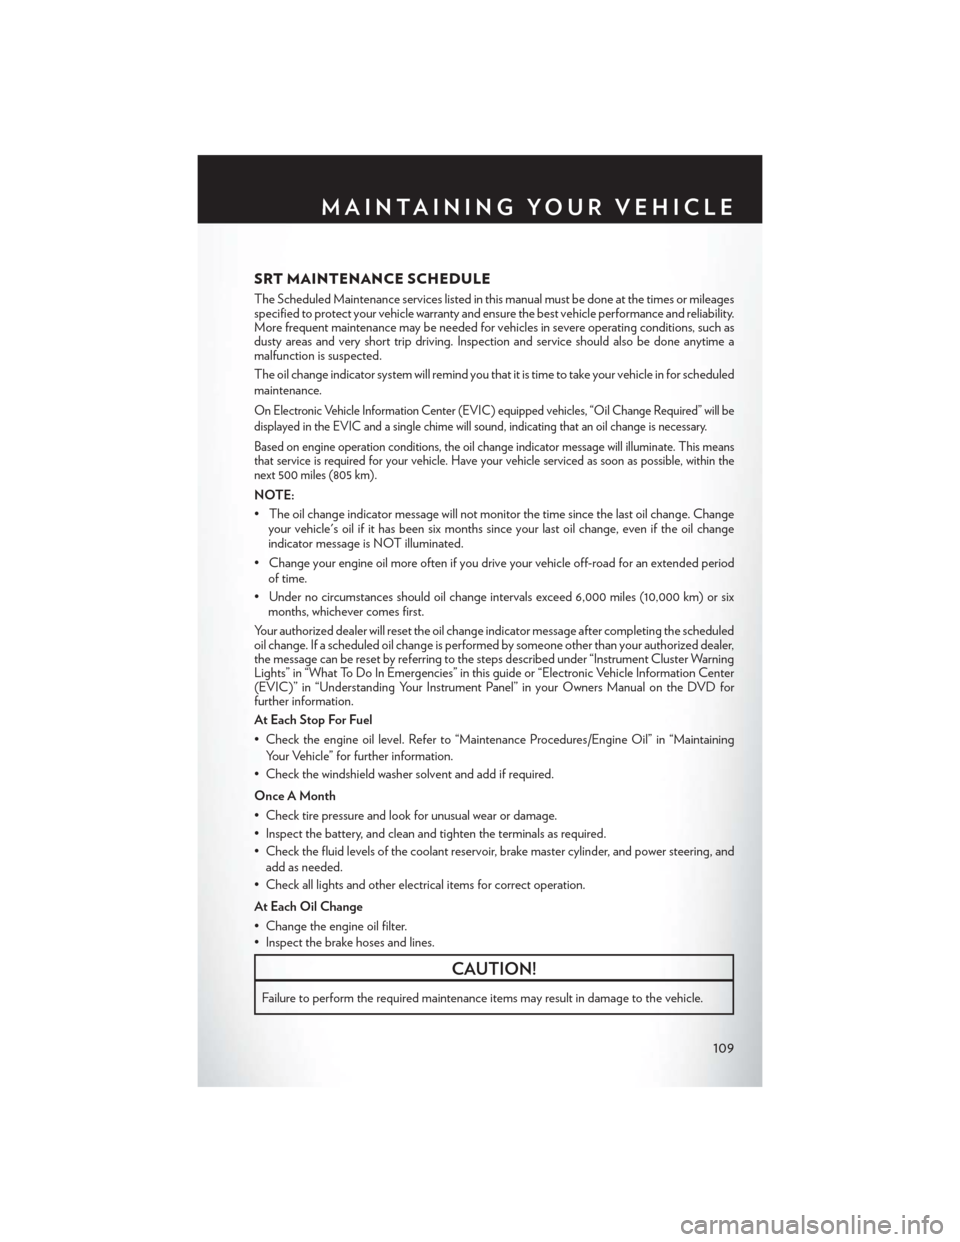 CHRYSLER 300 2014 2.G Owners Manual SRT MAINTENANCE SCHEDULE
The Scheduled Maintenance services listed in this manual must be done at the times or mileages
specified to protect your vehicle warranty and ensure the best vehicle performan